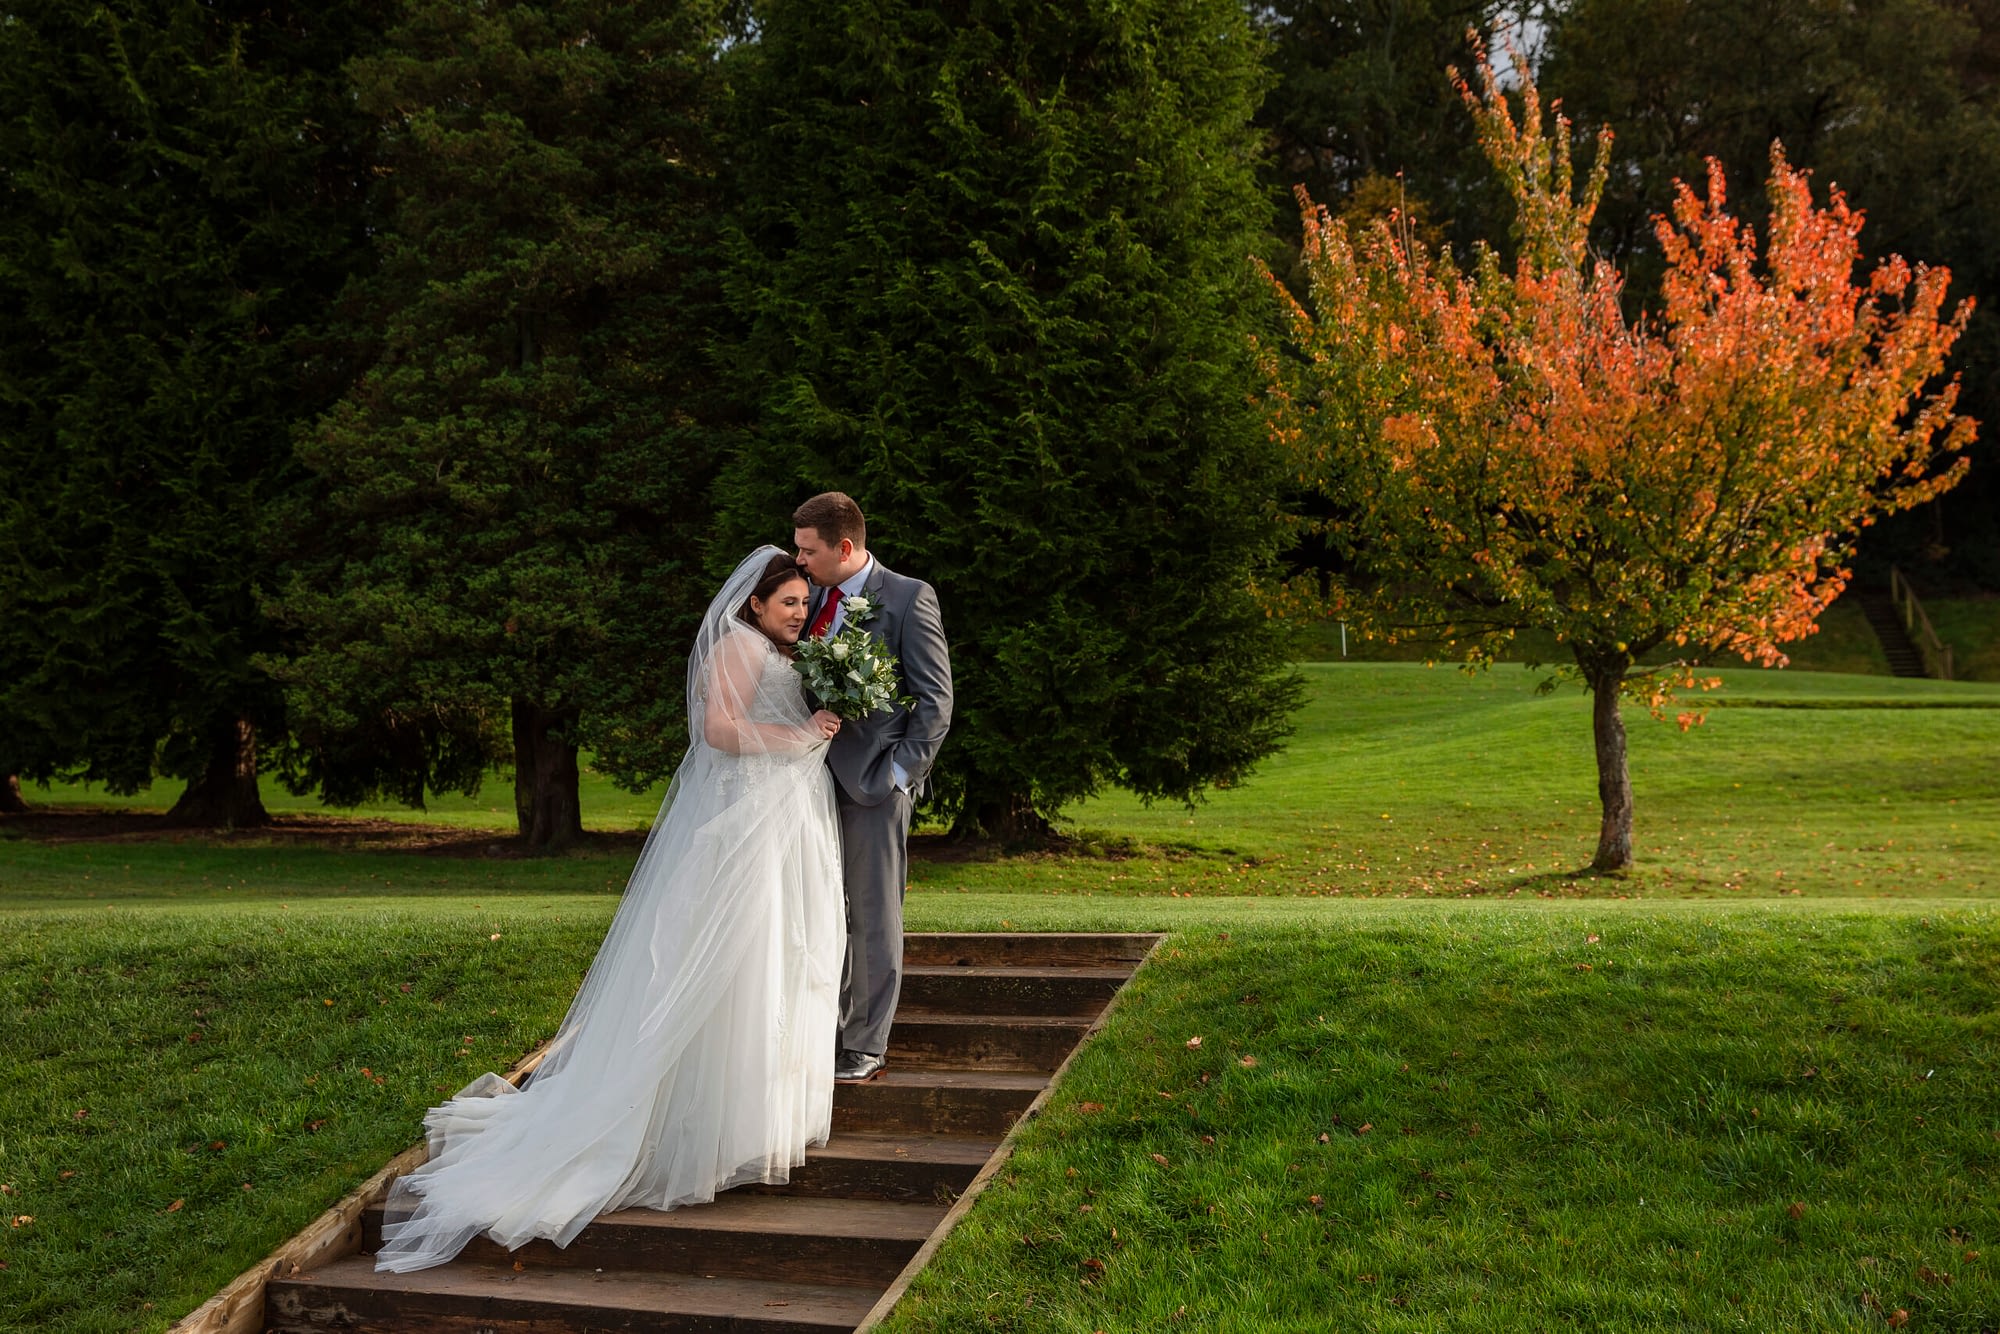 bride and groom standing together outside on steps with trees